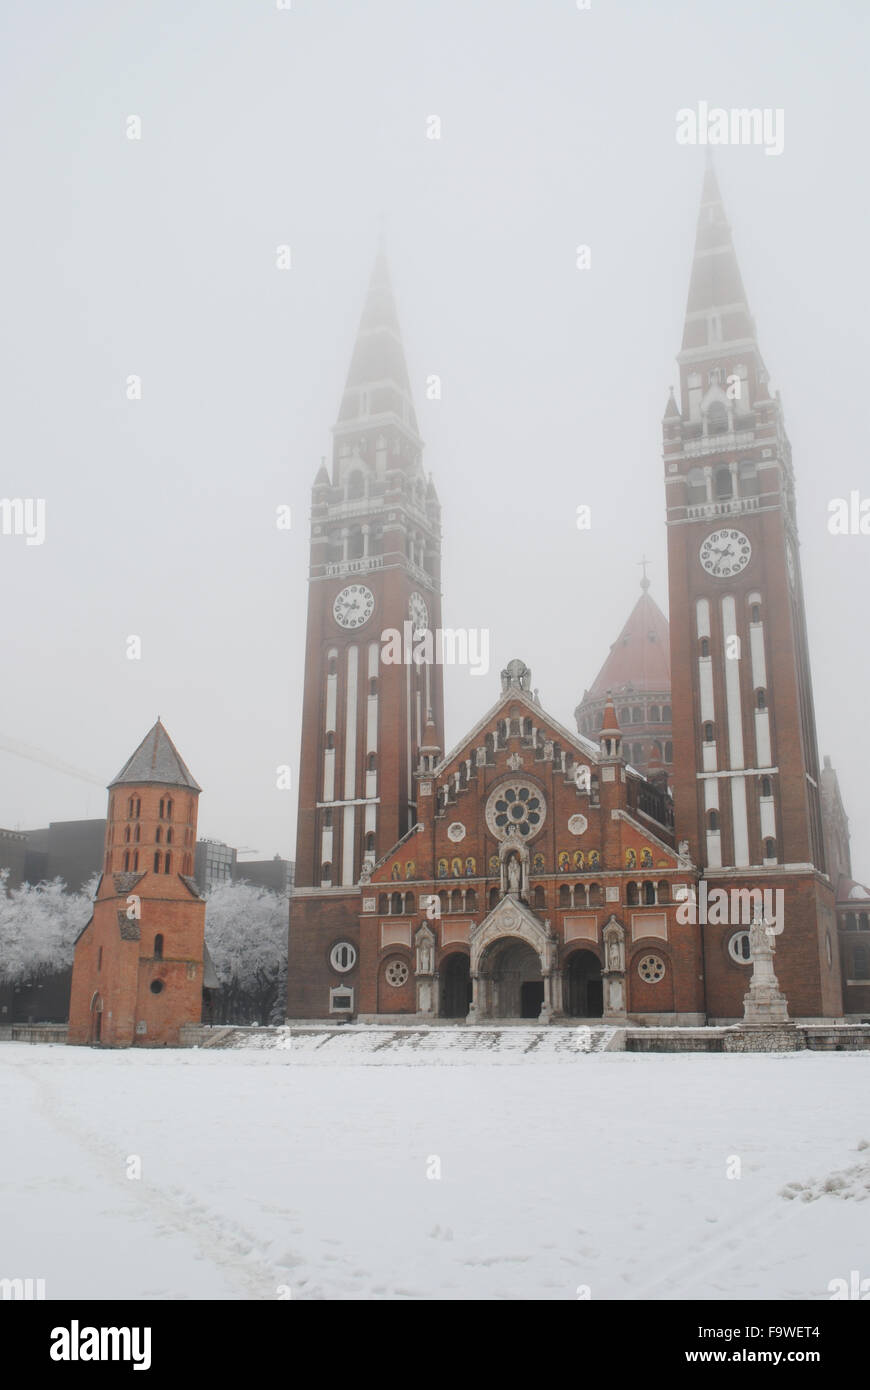 The Votive Church, the Demetrius Tower and the snowy Dom Square in Szeged, Hungary. Stock Photo